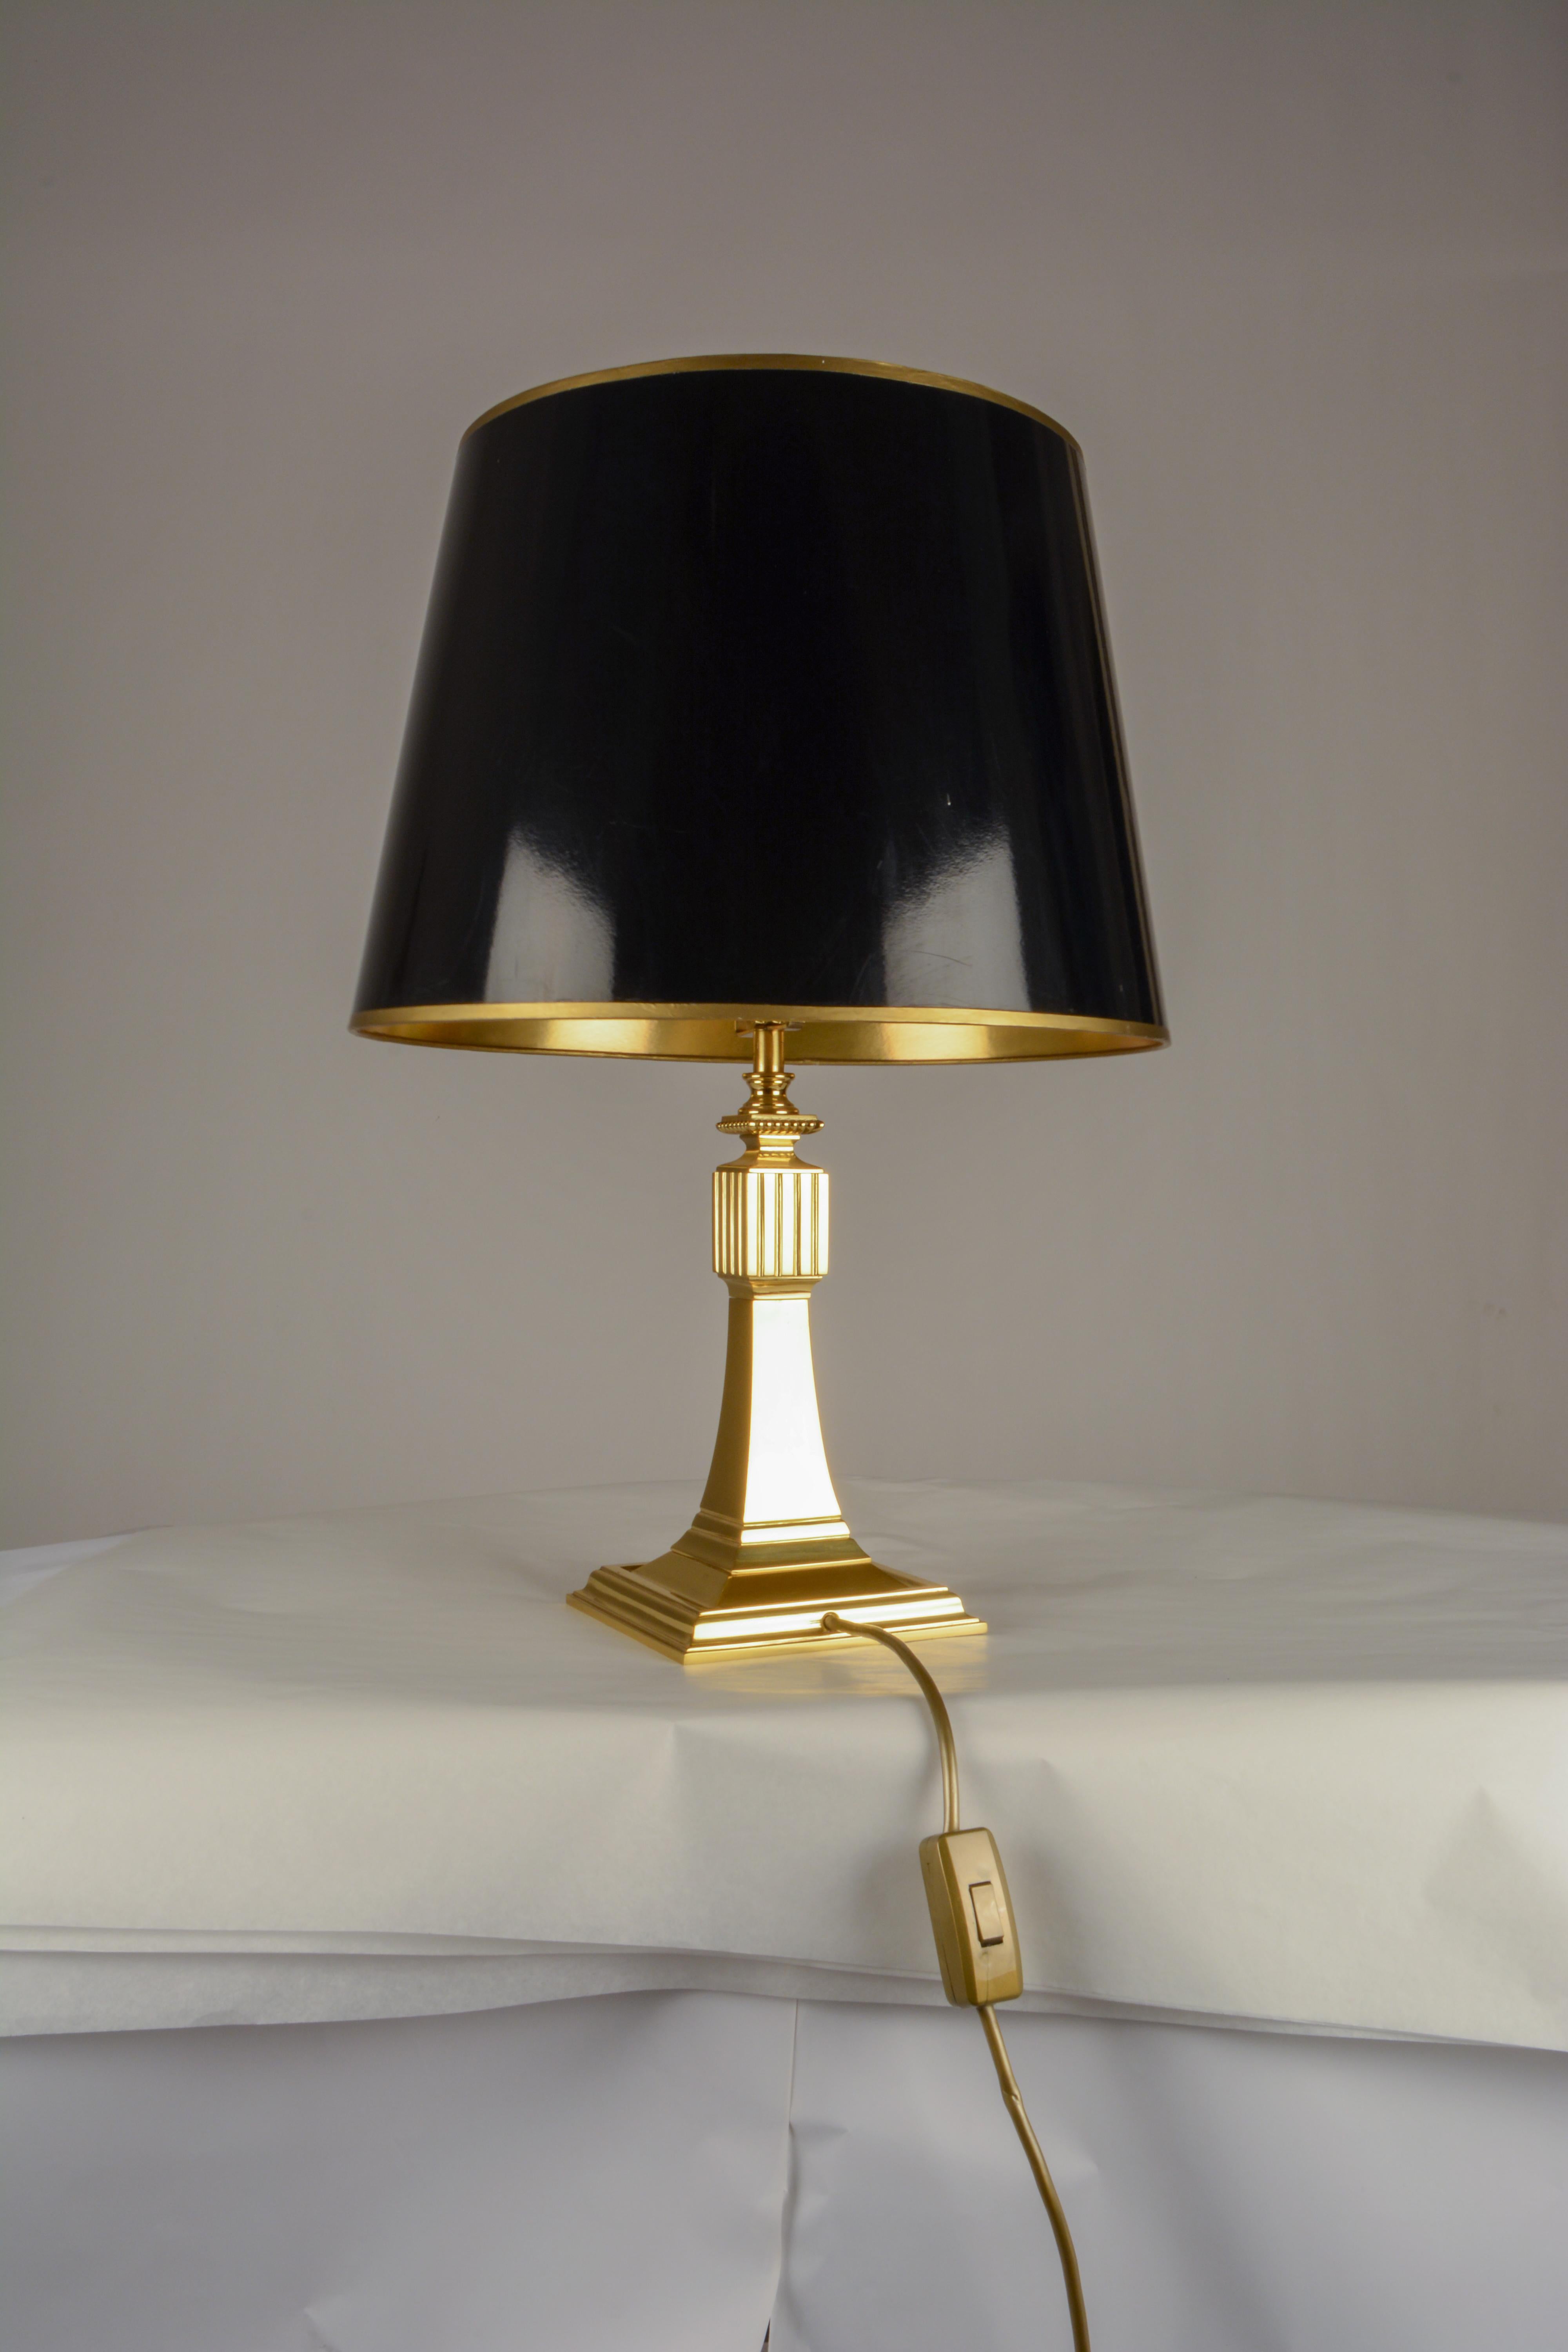 Austrian Art Deco Brass Table Lamp and Writing Set with Ink Well and Blotter Rocker For Sale